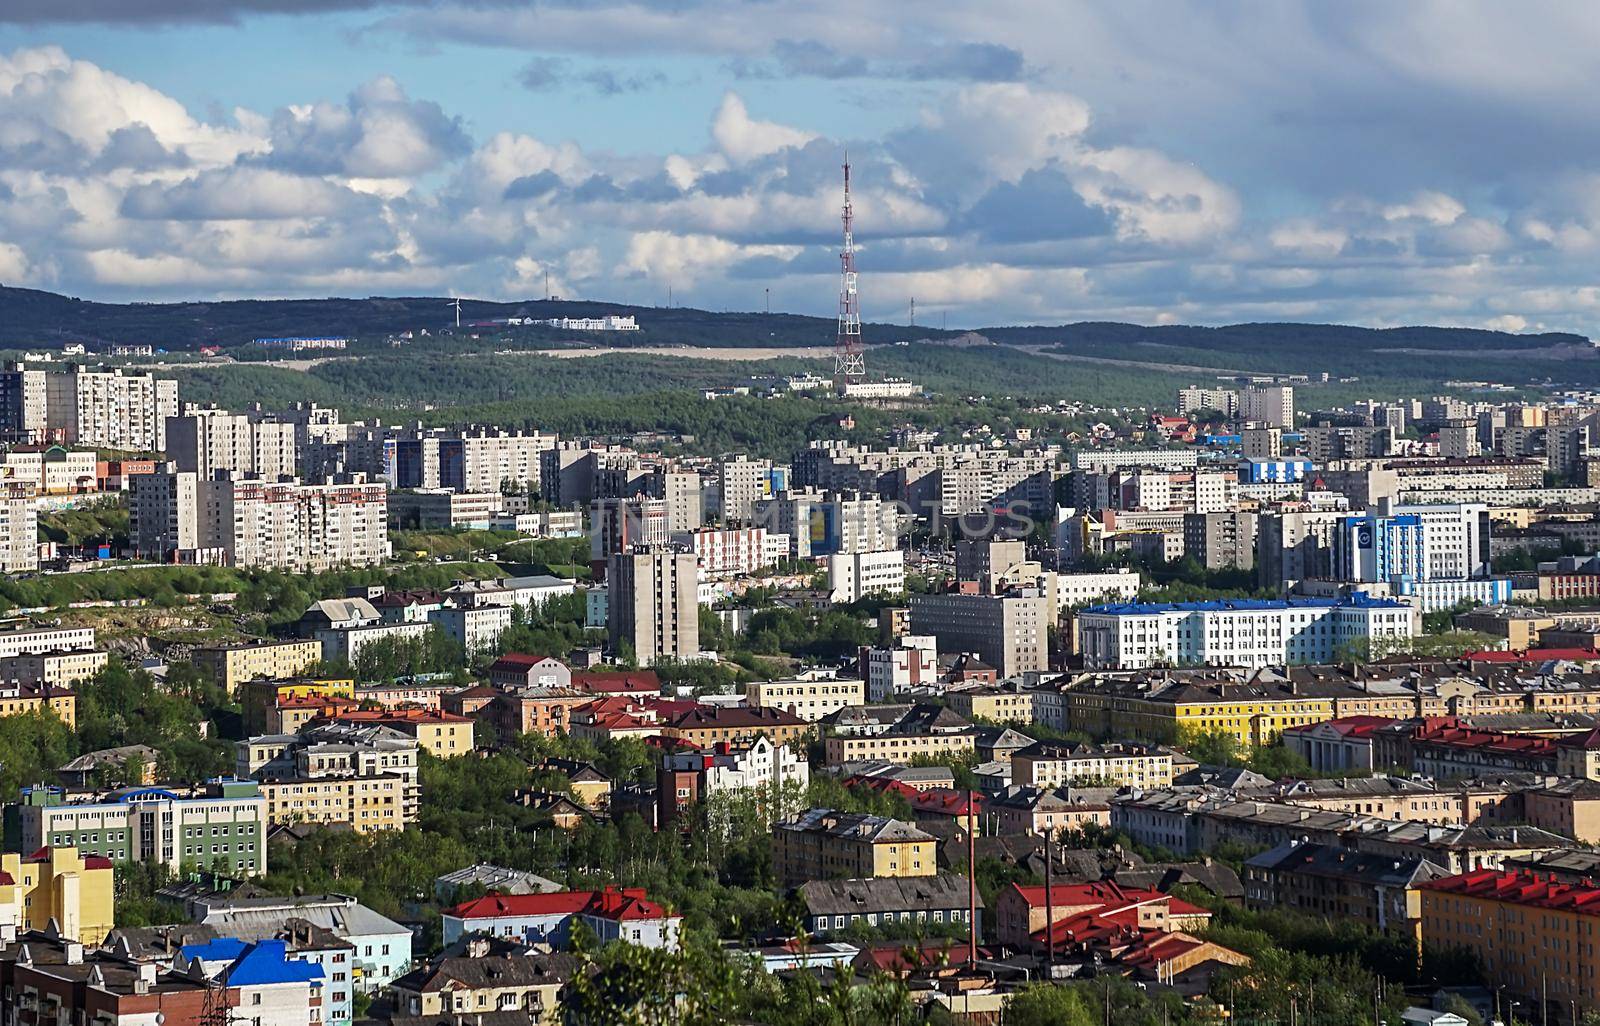 Murmansk, Russia. Urban landscape with buildings and architecture.